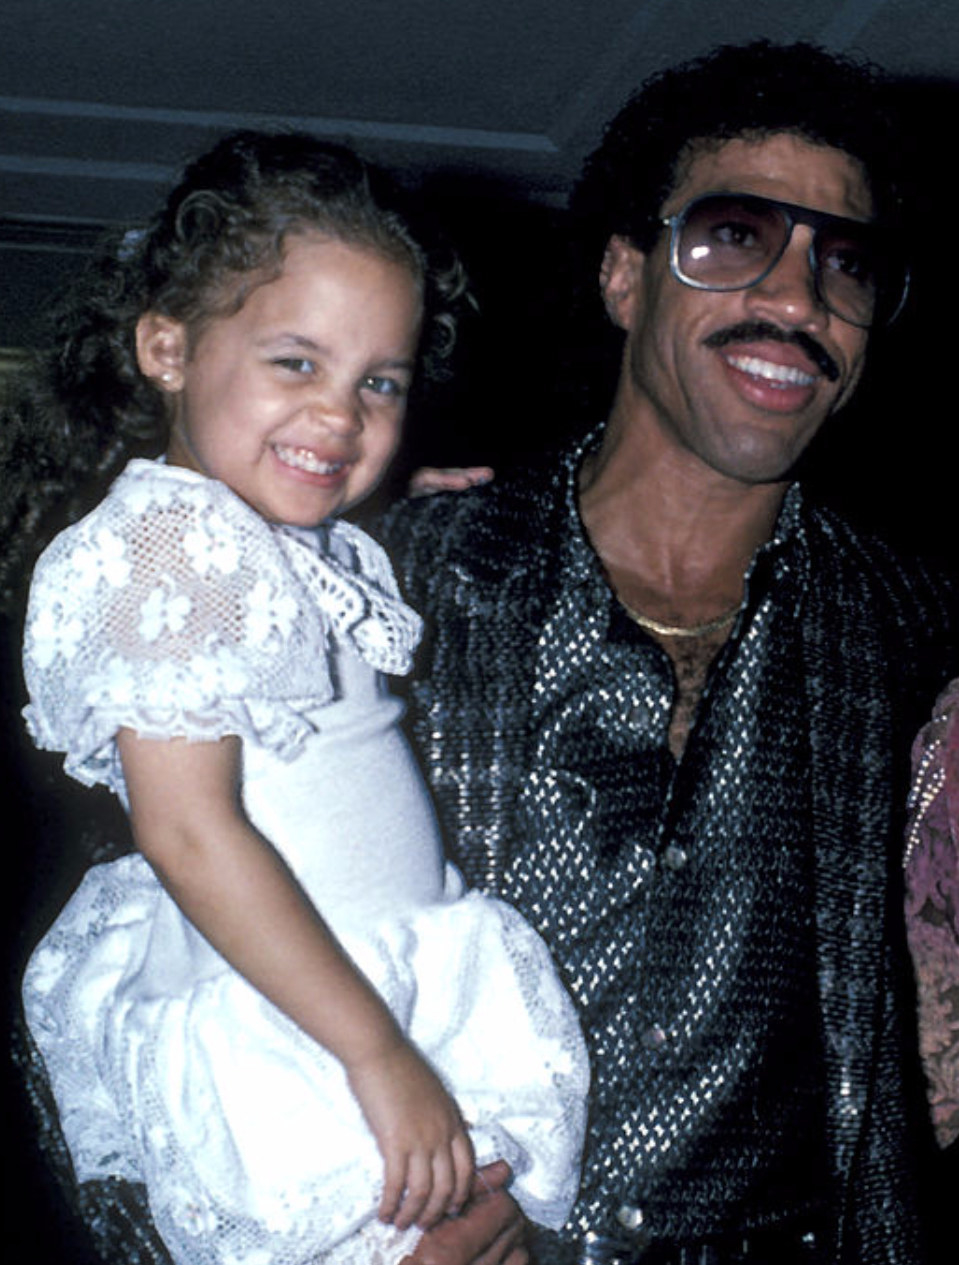 Lionel Richie holding a young Nicole Richie at an event in 1985